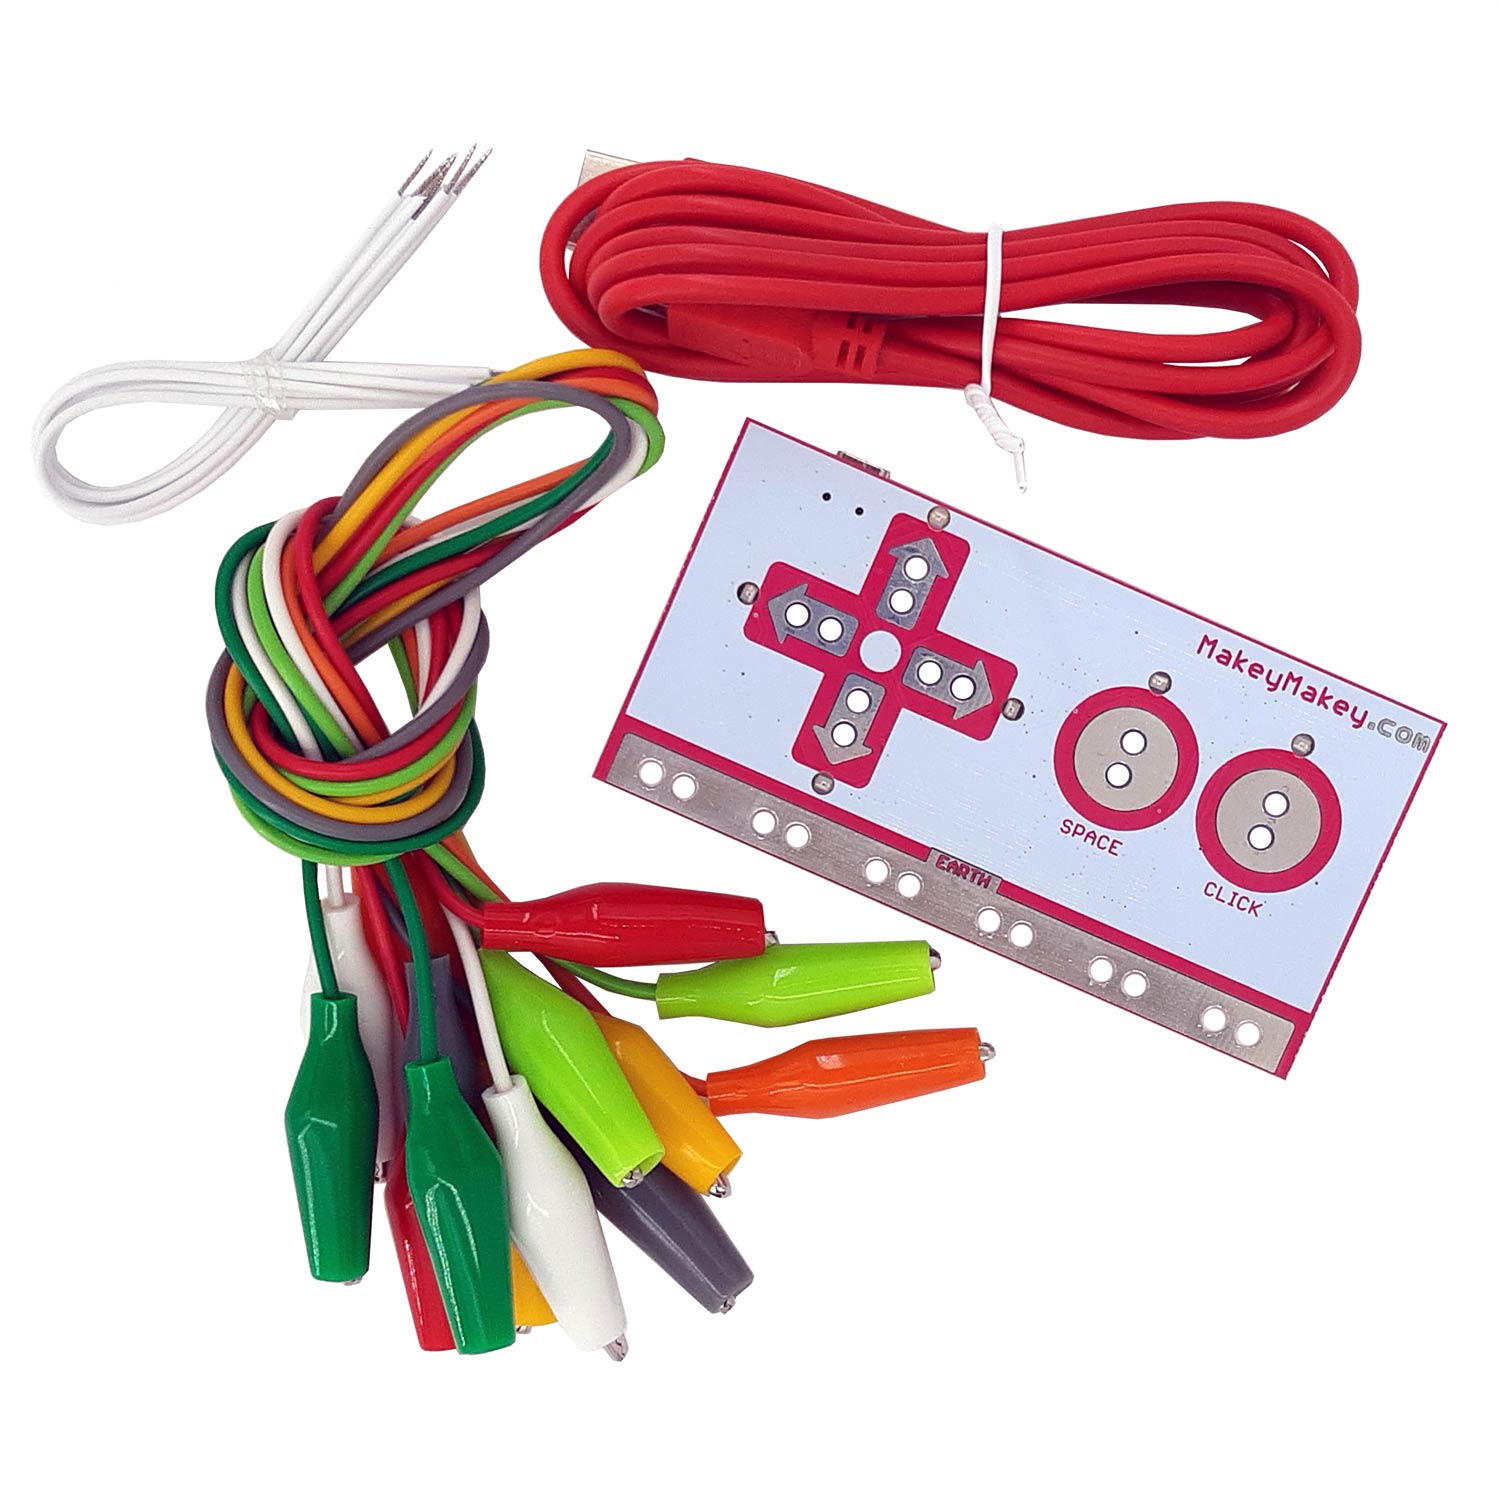 Kit Makey Makey con cables